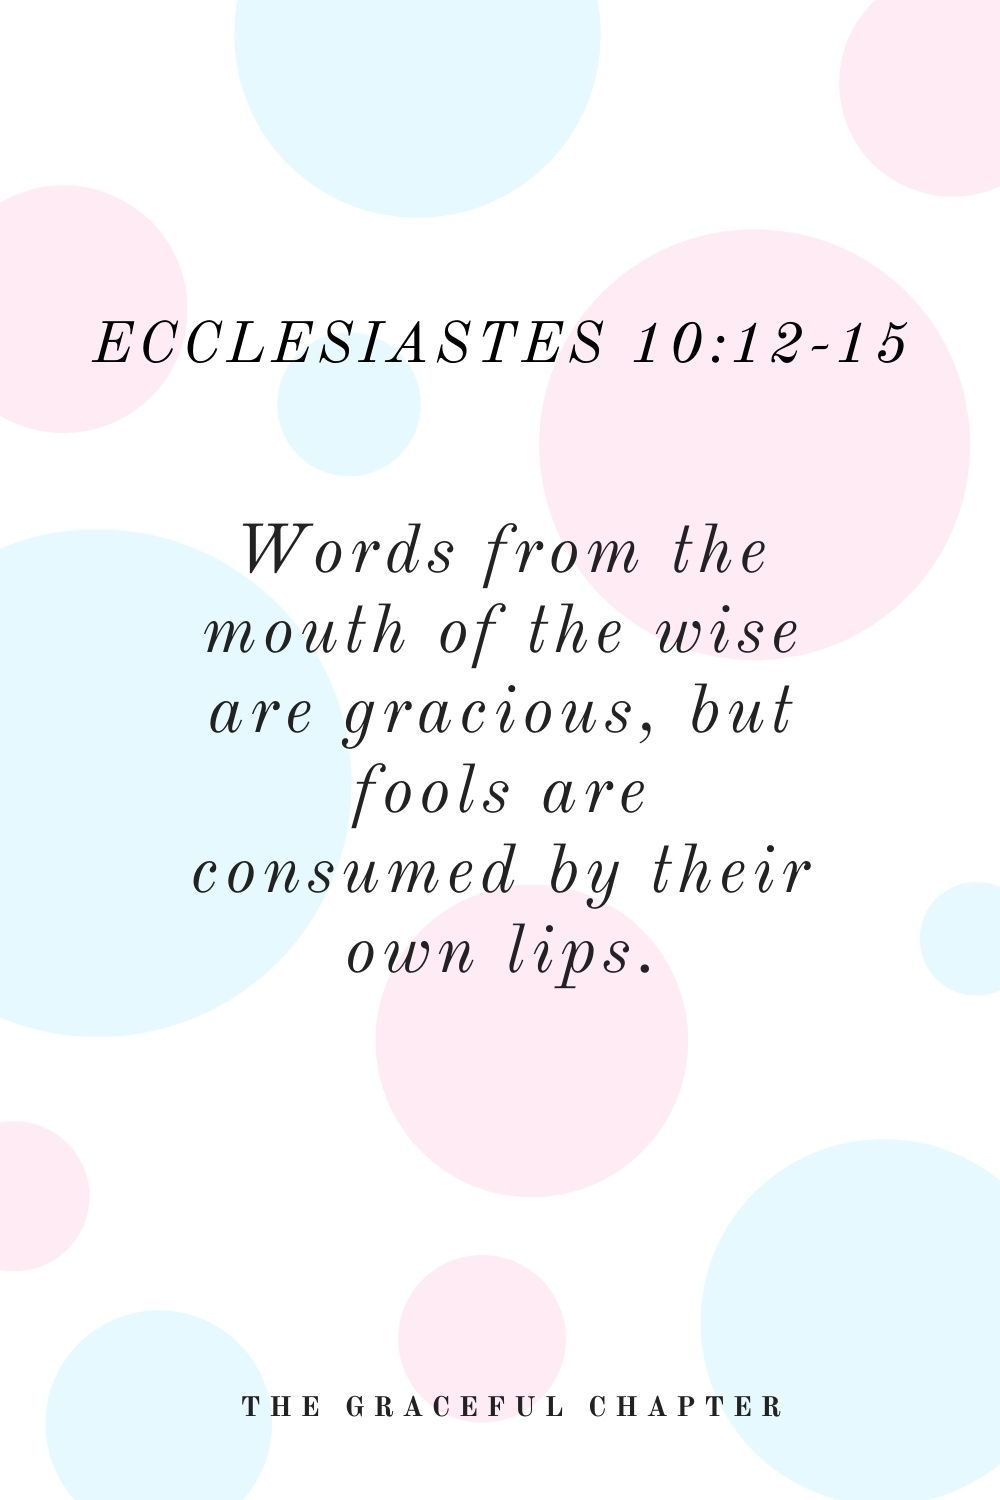 Words from the mouth of the wise are gracious, but fools are consumed by their own lips. Ecclesiastes 10:12